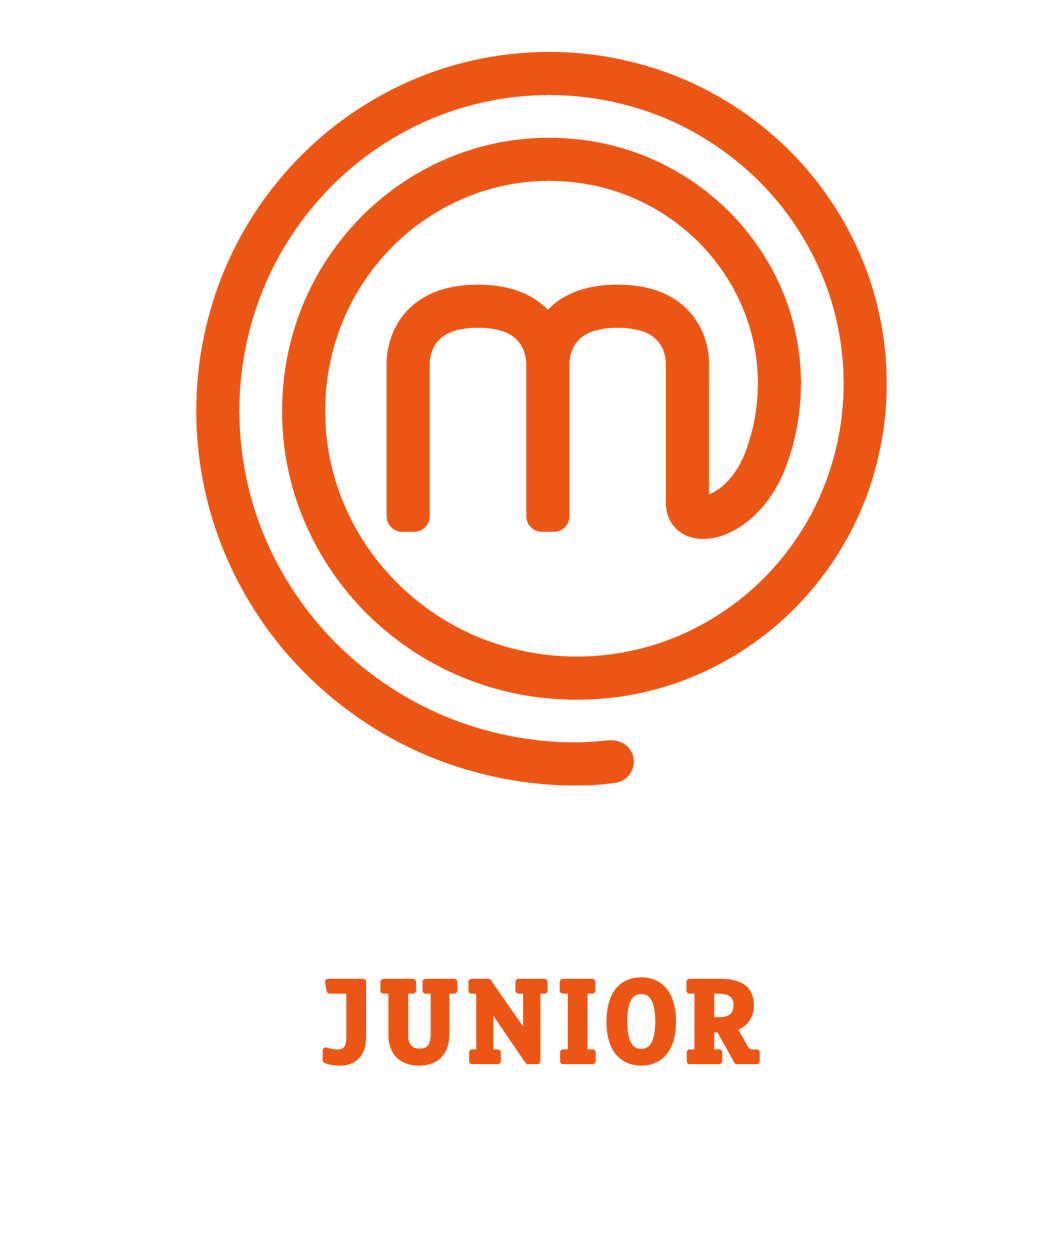 cooking clipart junior chef